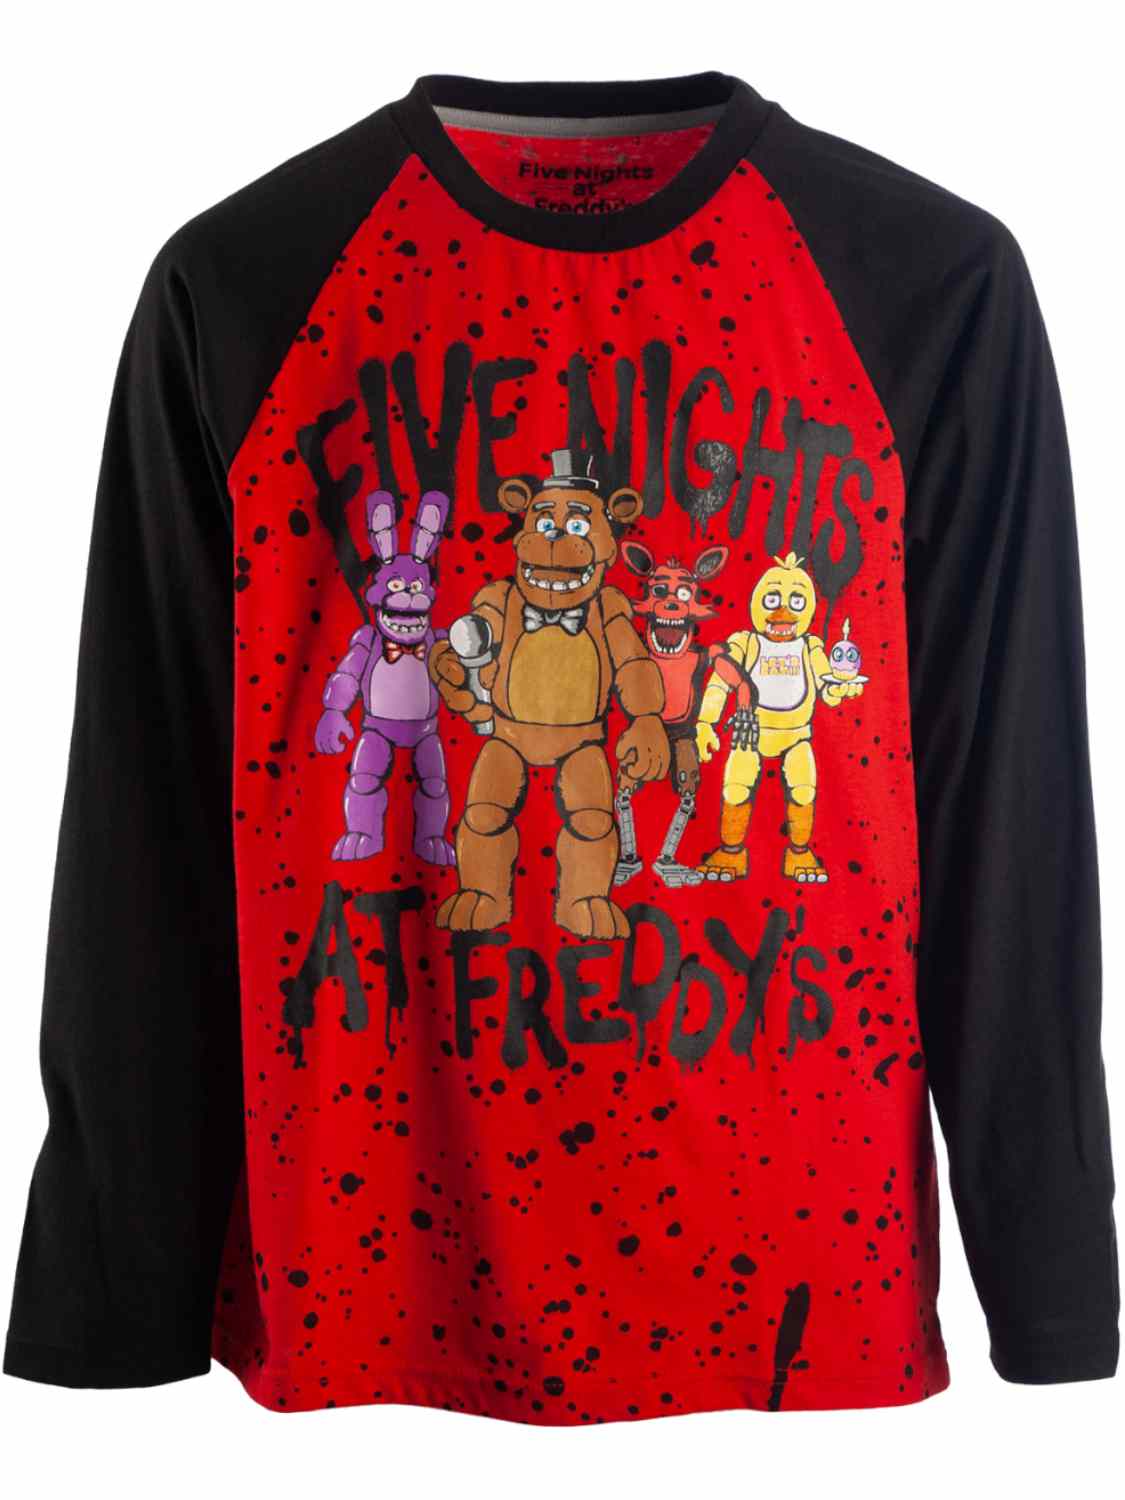 Five Nights at Freddy's Boys Red & Black Speckle Five Nights At Freddy's Long Sleeve T-Shirt Tee